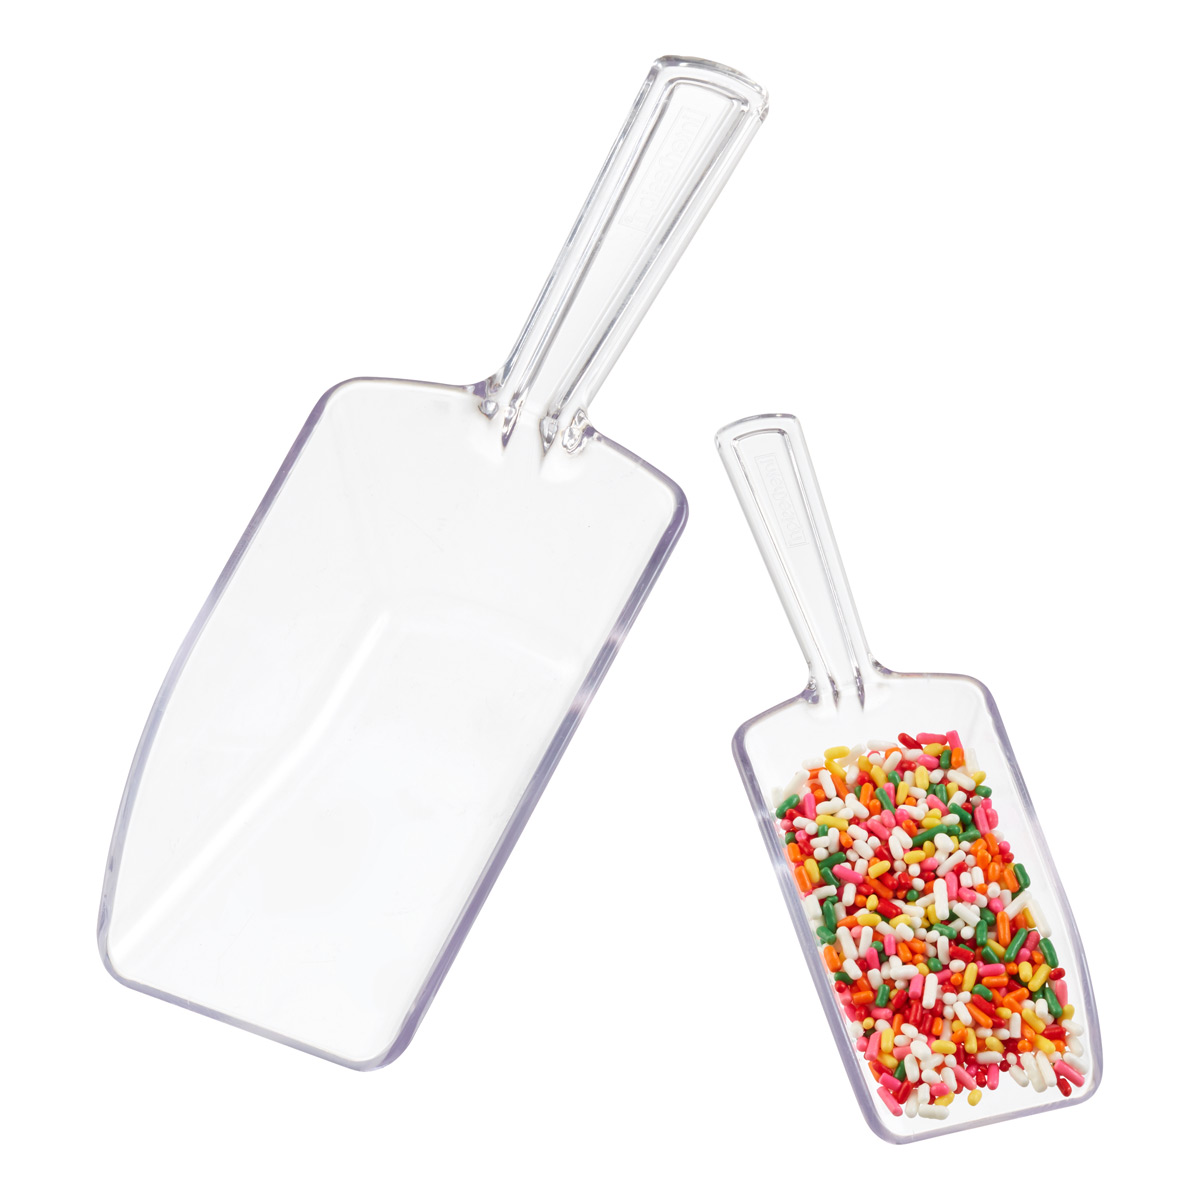 Todop Plastic Scoops Set 2 Pcs Small Measuring Spoons Clear Sweet Scoops Small Ice Scoop for Kitchen or Party